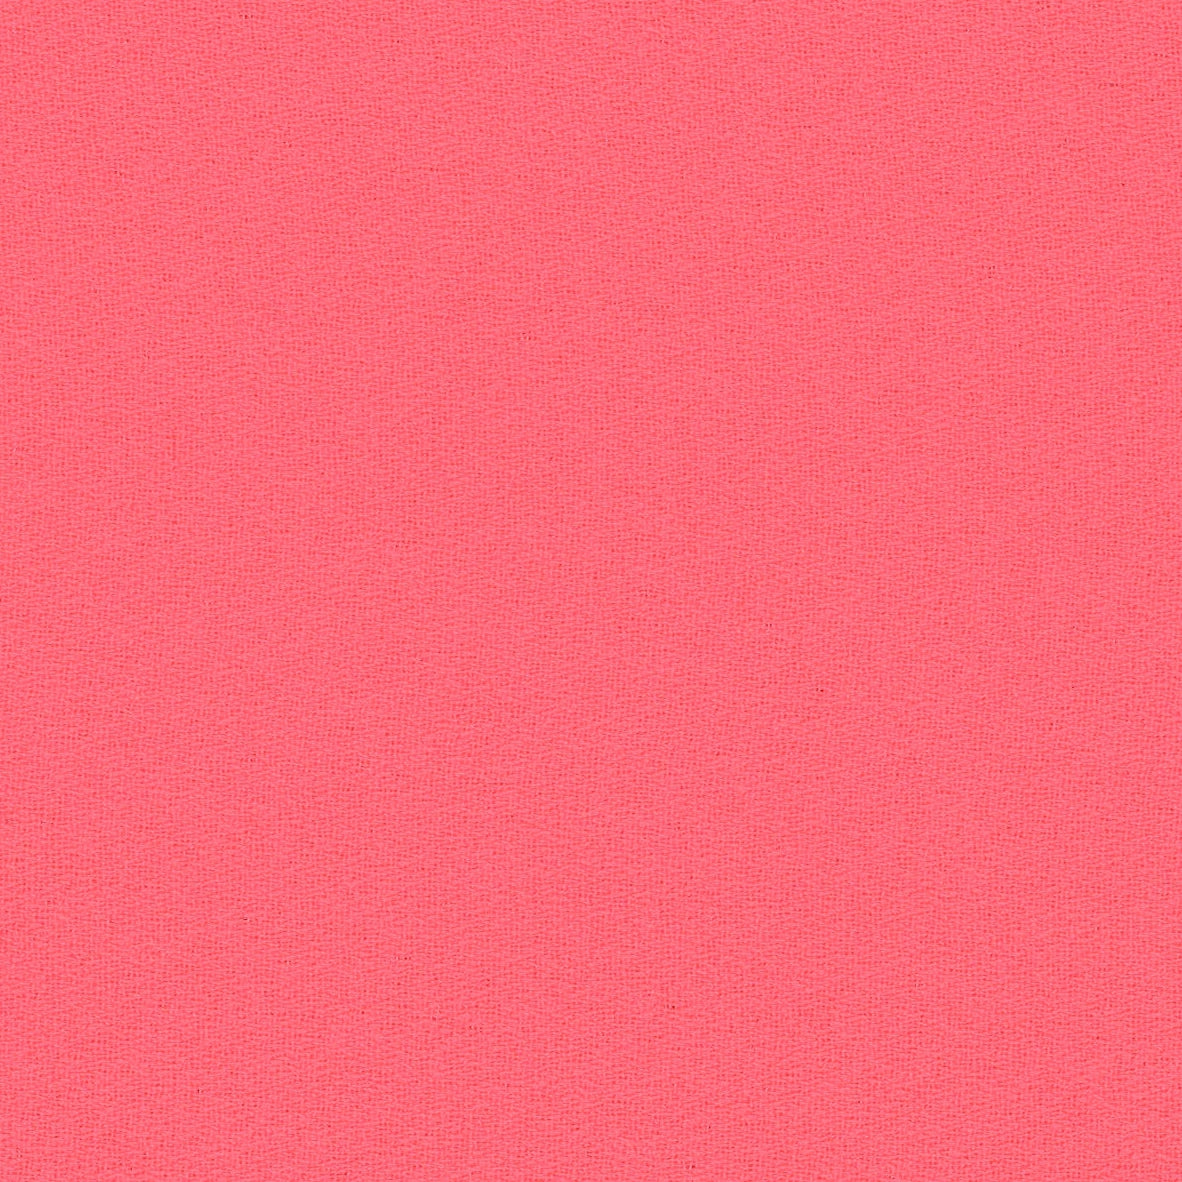 35001-02 Pink Crepe Plain Dyed Blend 315g/yd 54&quot; crepe pink plain dyed polyester woven Solid Color - knit fabric - woven fabric - fabric company - fabric wholesale - fabric b2b - fabric factory - high quality fabric - hong kong fabric - fabric hk - acetate fabric - cotton fabric - linen fabric - metallic fabric - nylon fabric - polyester fabric - spandex fabric - chun wing hing - cwh hk - fabric worldwide ship - 針織布 - 梳織布 - 布料公司- 布料批發 - 香港布料 - 秦榮興